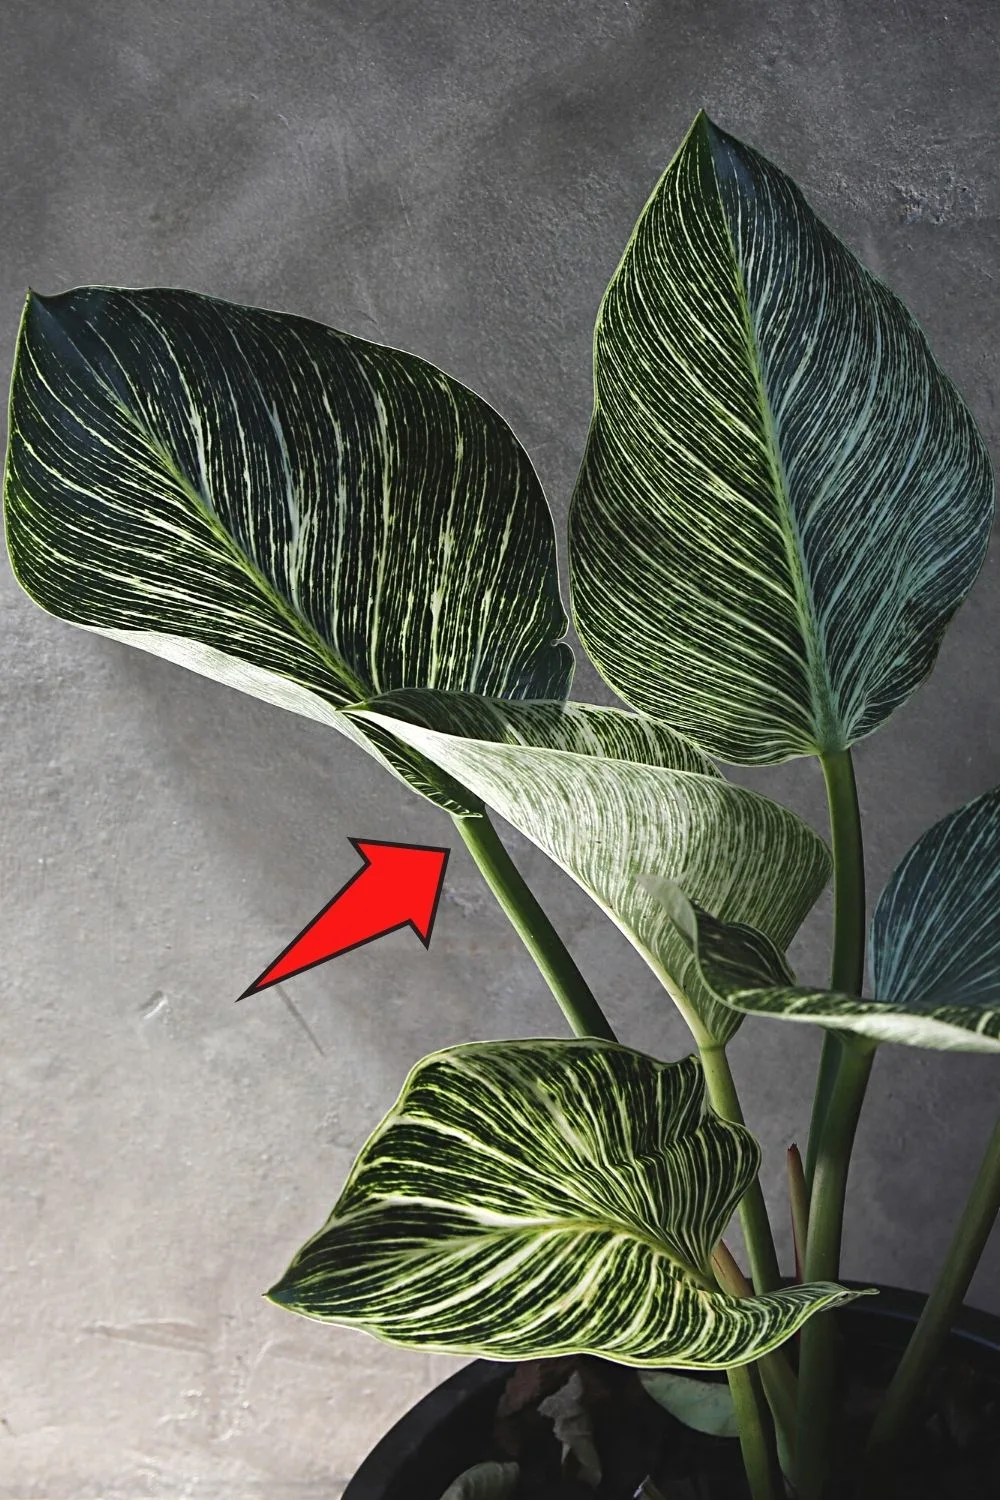 Choose a Philodendron Birkin stem that is healthy and who's leaf has lots of white stripes